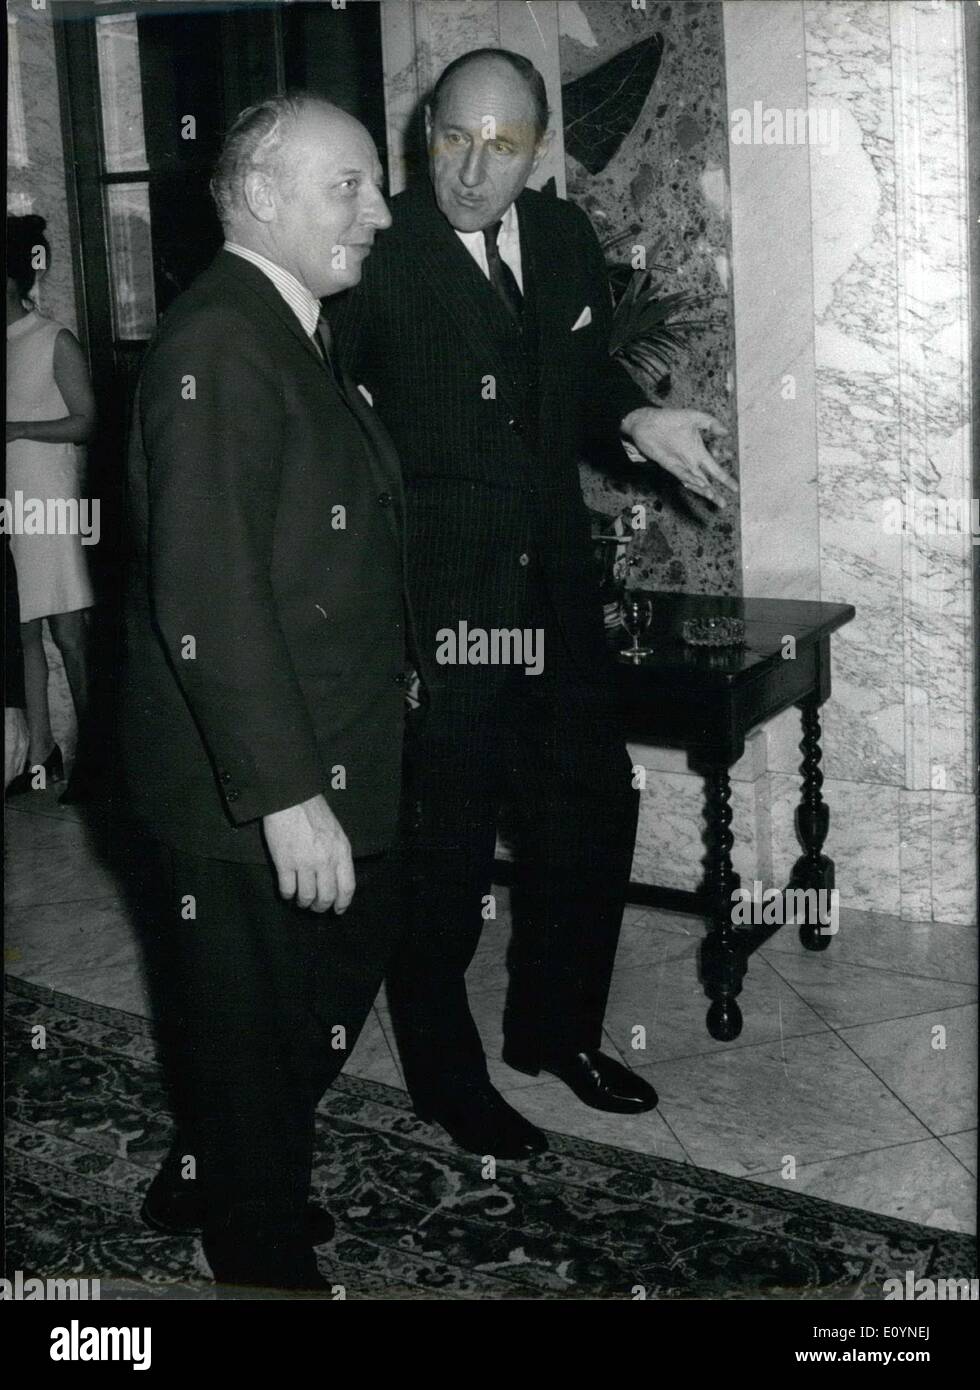 Dec. 04, 1970 - German Minister of Foreign Affairs, Mr. Walter Scheel, and Dutch Minister of Foreign Affairs, Mr. Luns are pictured during a reception given after the opening session of the NATO Council in Brussels. Stock Photo